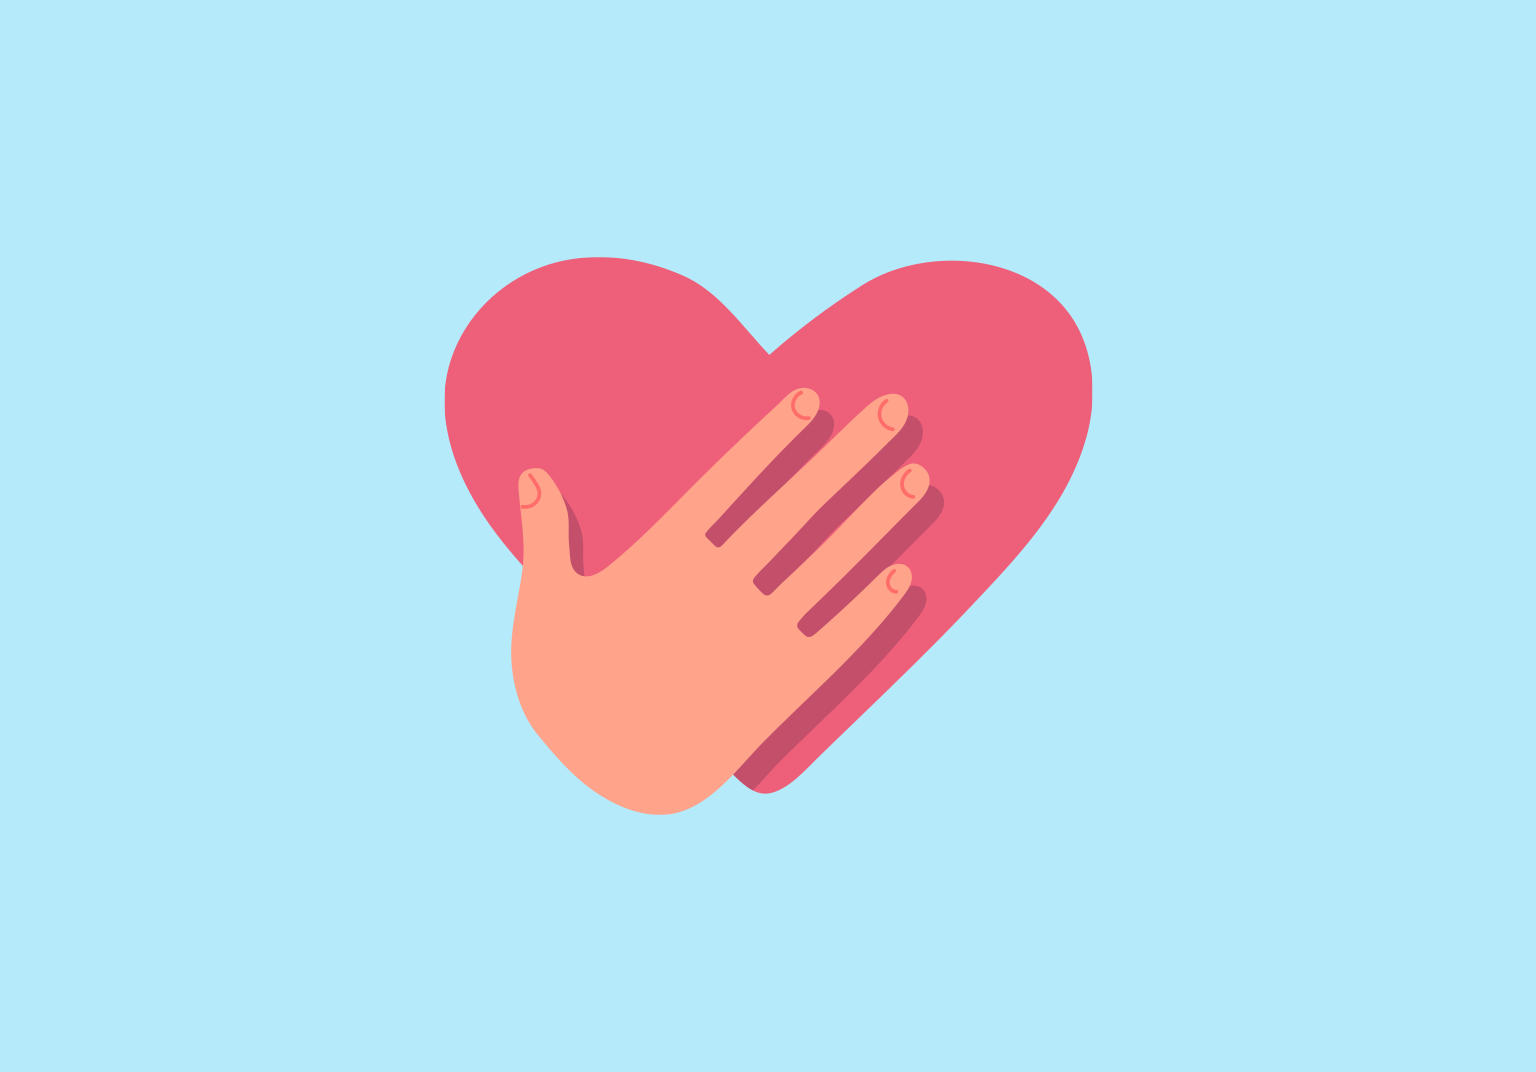 An illustration of a hand over a heart on a blue background